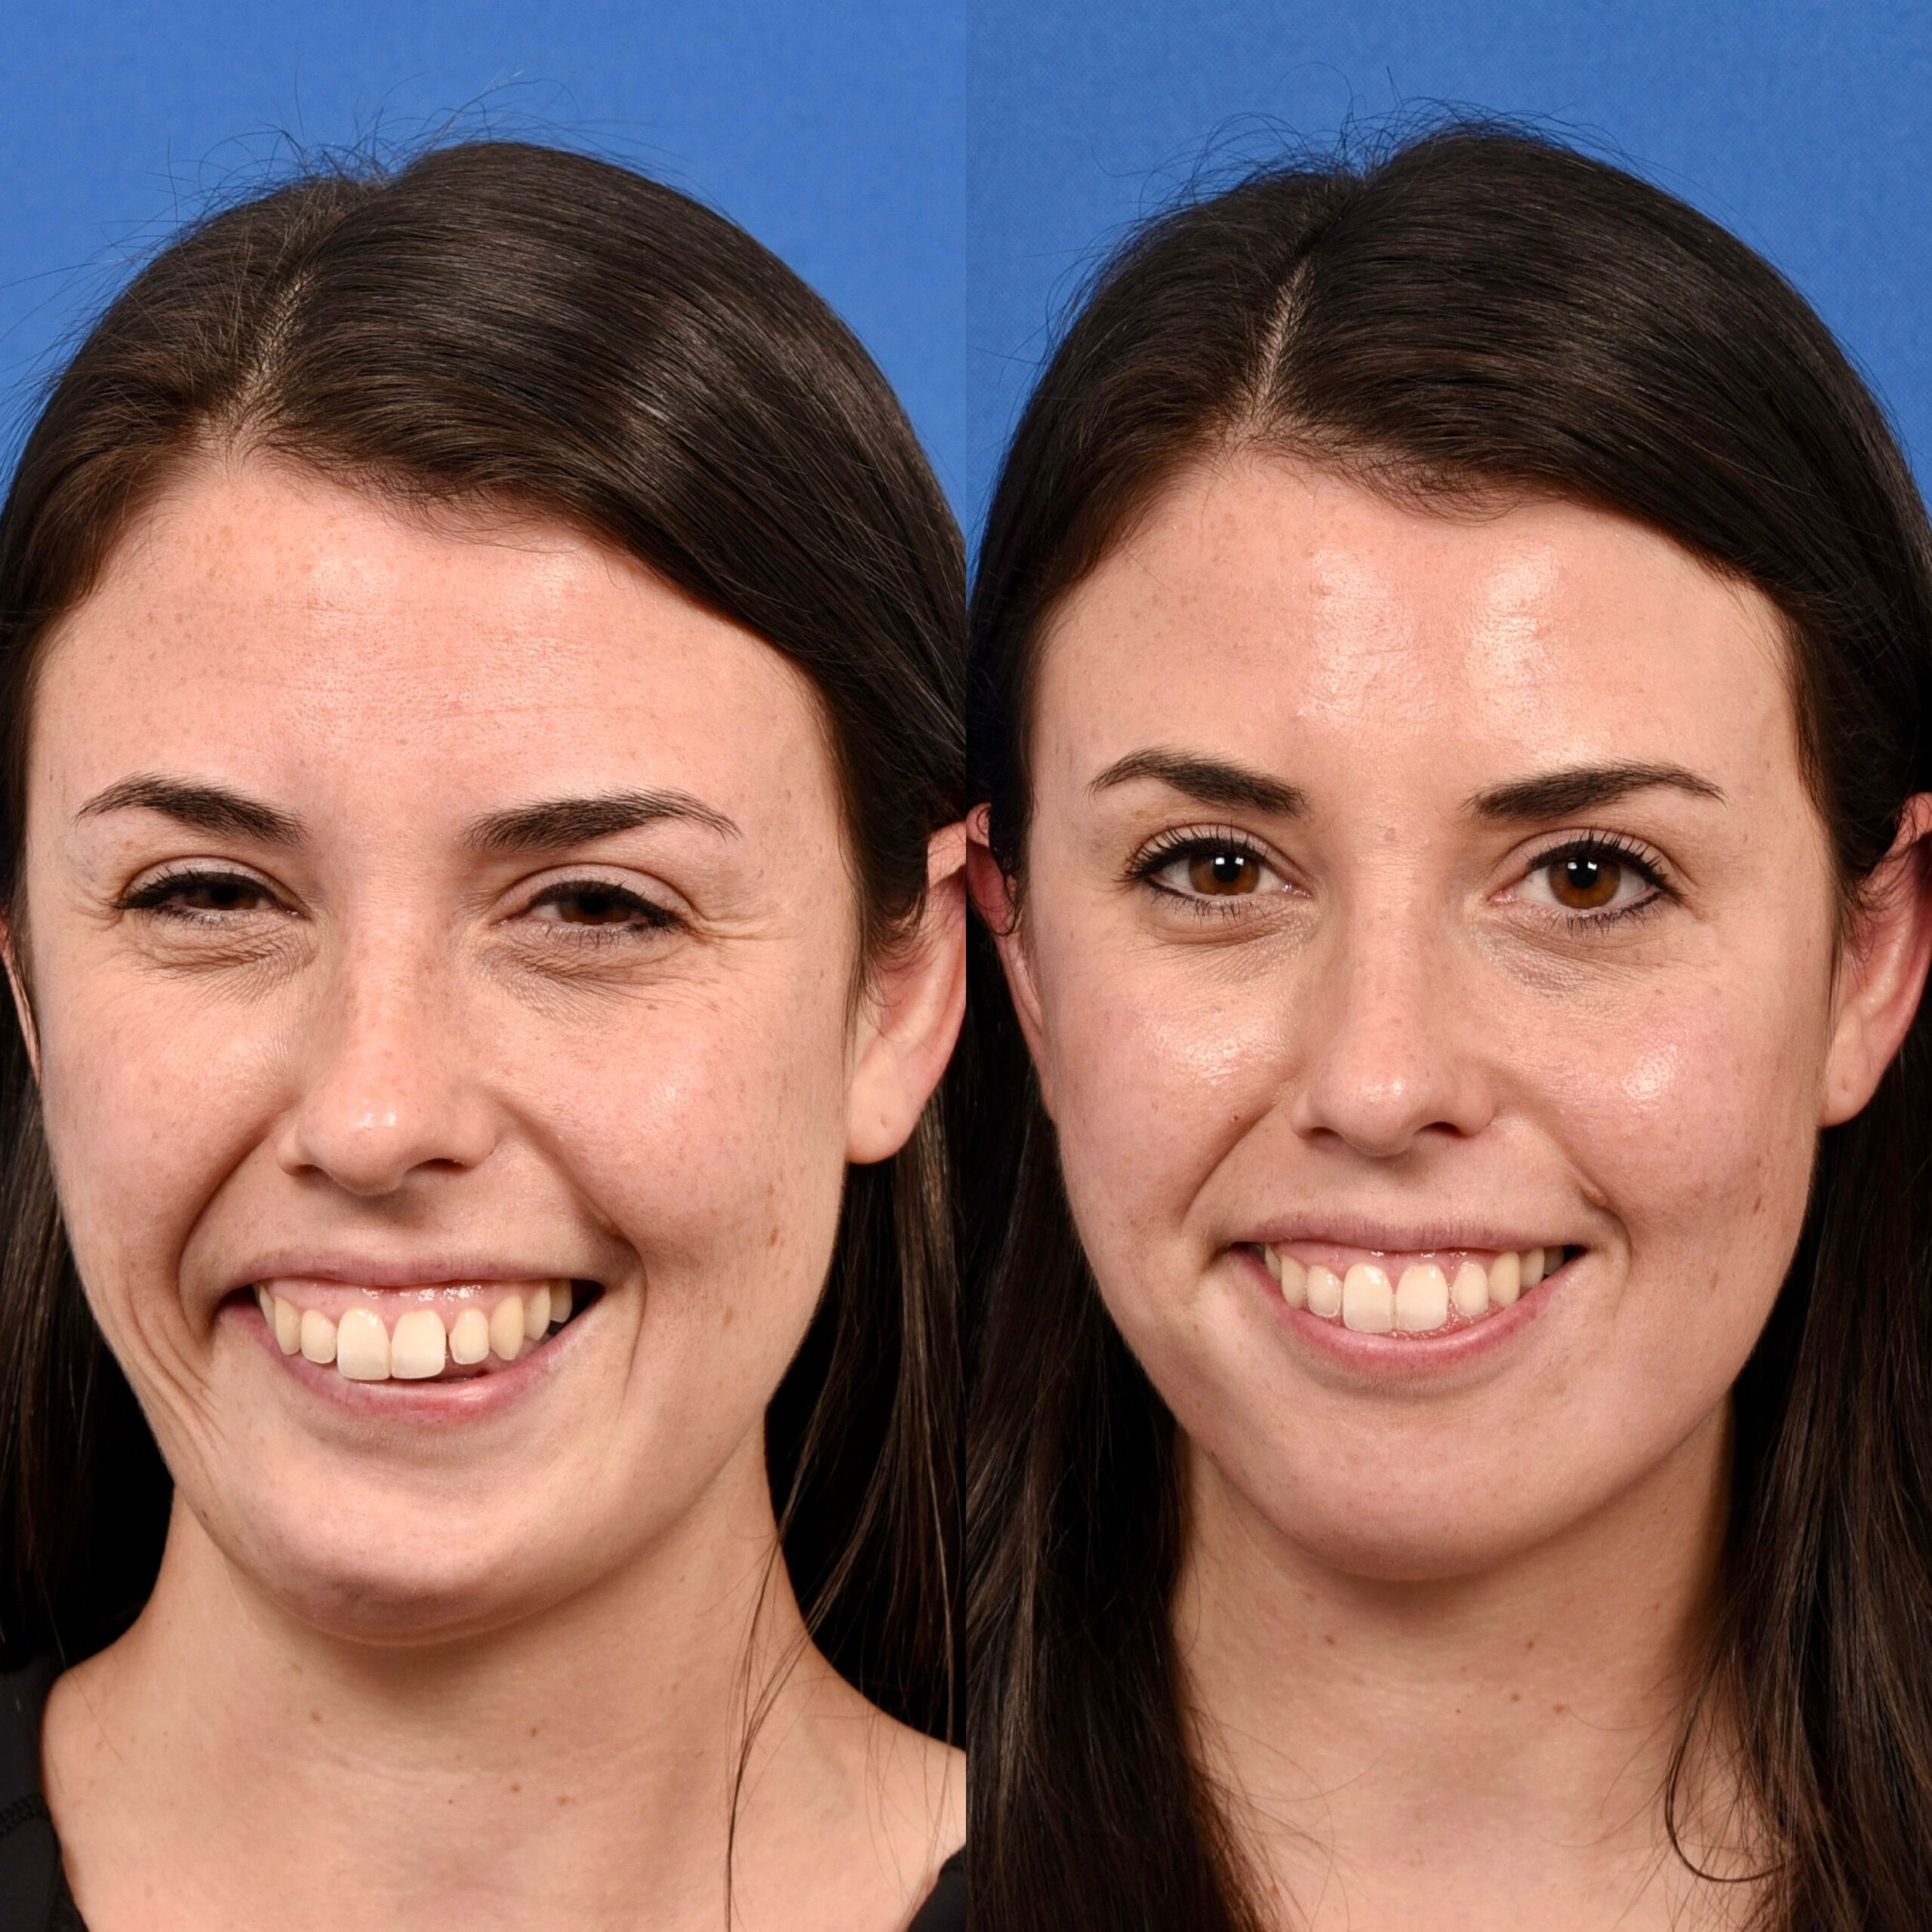 A woman after facial paralysis surgery before and after pictures. Smile reanimation transformation pictures.